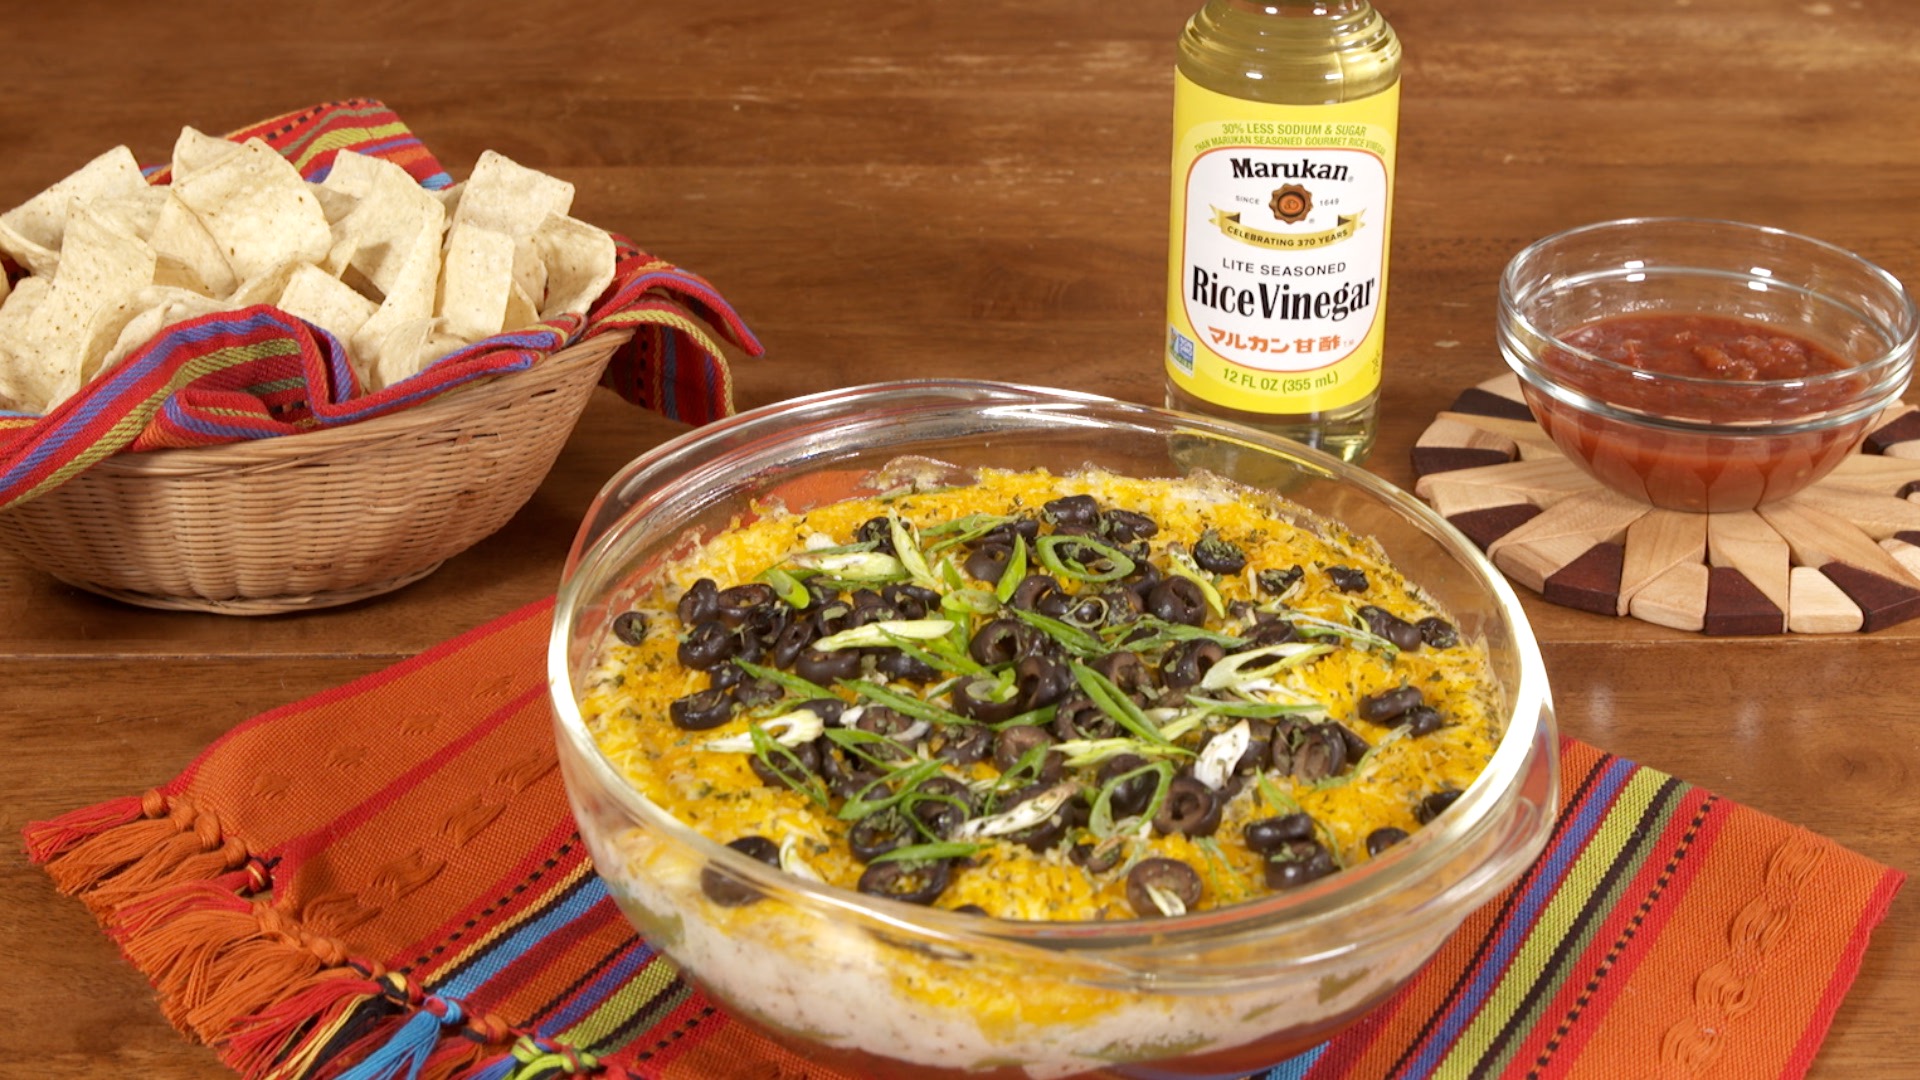 Kick Off Your Party With This Marukan 7-Layer Bean Dip